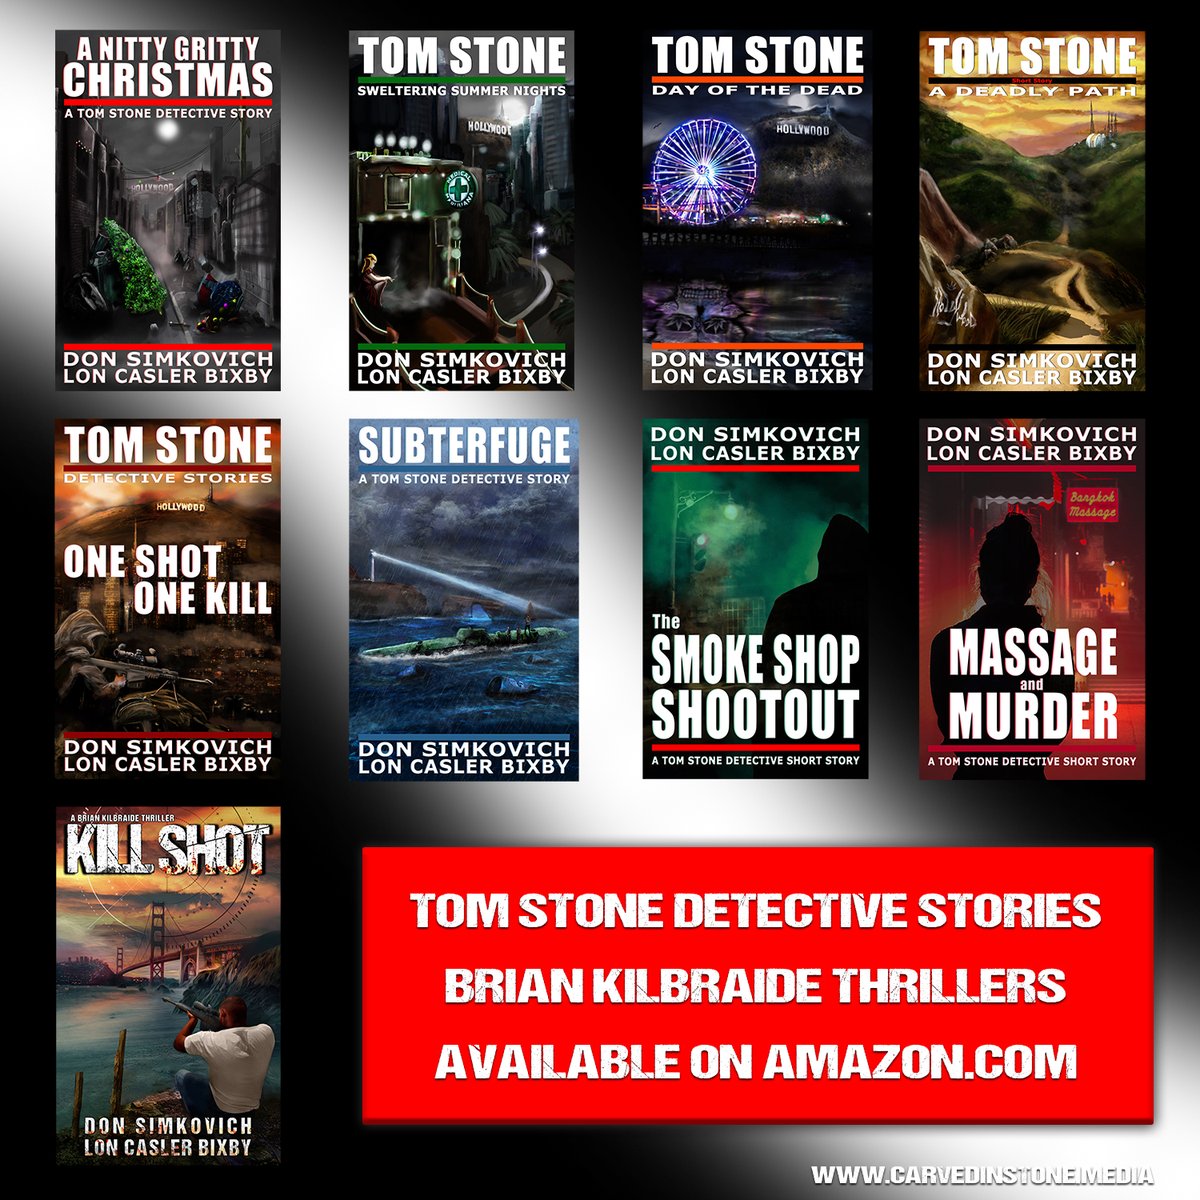 Tom Stone Detective Stories & Brian Kilbraide Thrillers Available on Amazon.

amazon.com/Lon-Casler-Bix…

#detectiveseries #detectivenovels #crimethrillers #bestseller #thrillers #kindleunlimited #politicalthriller #giftideas